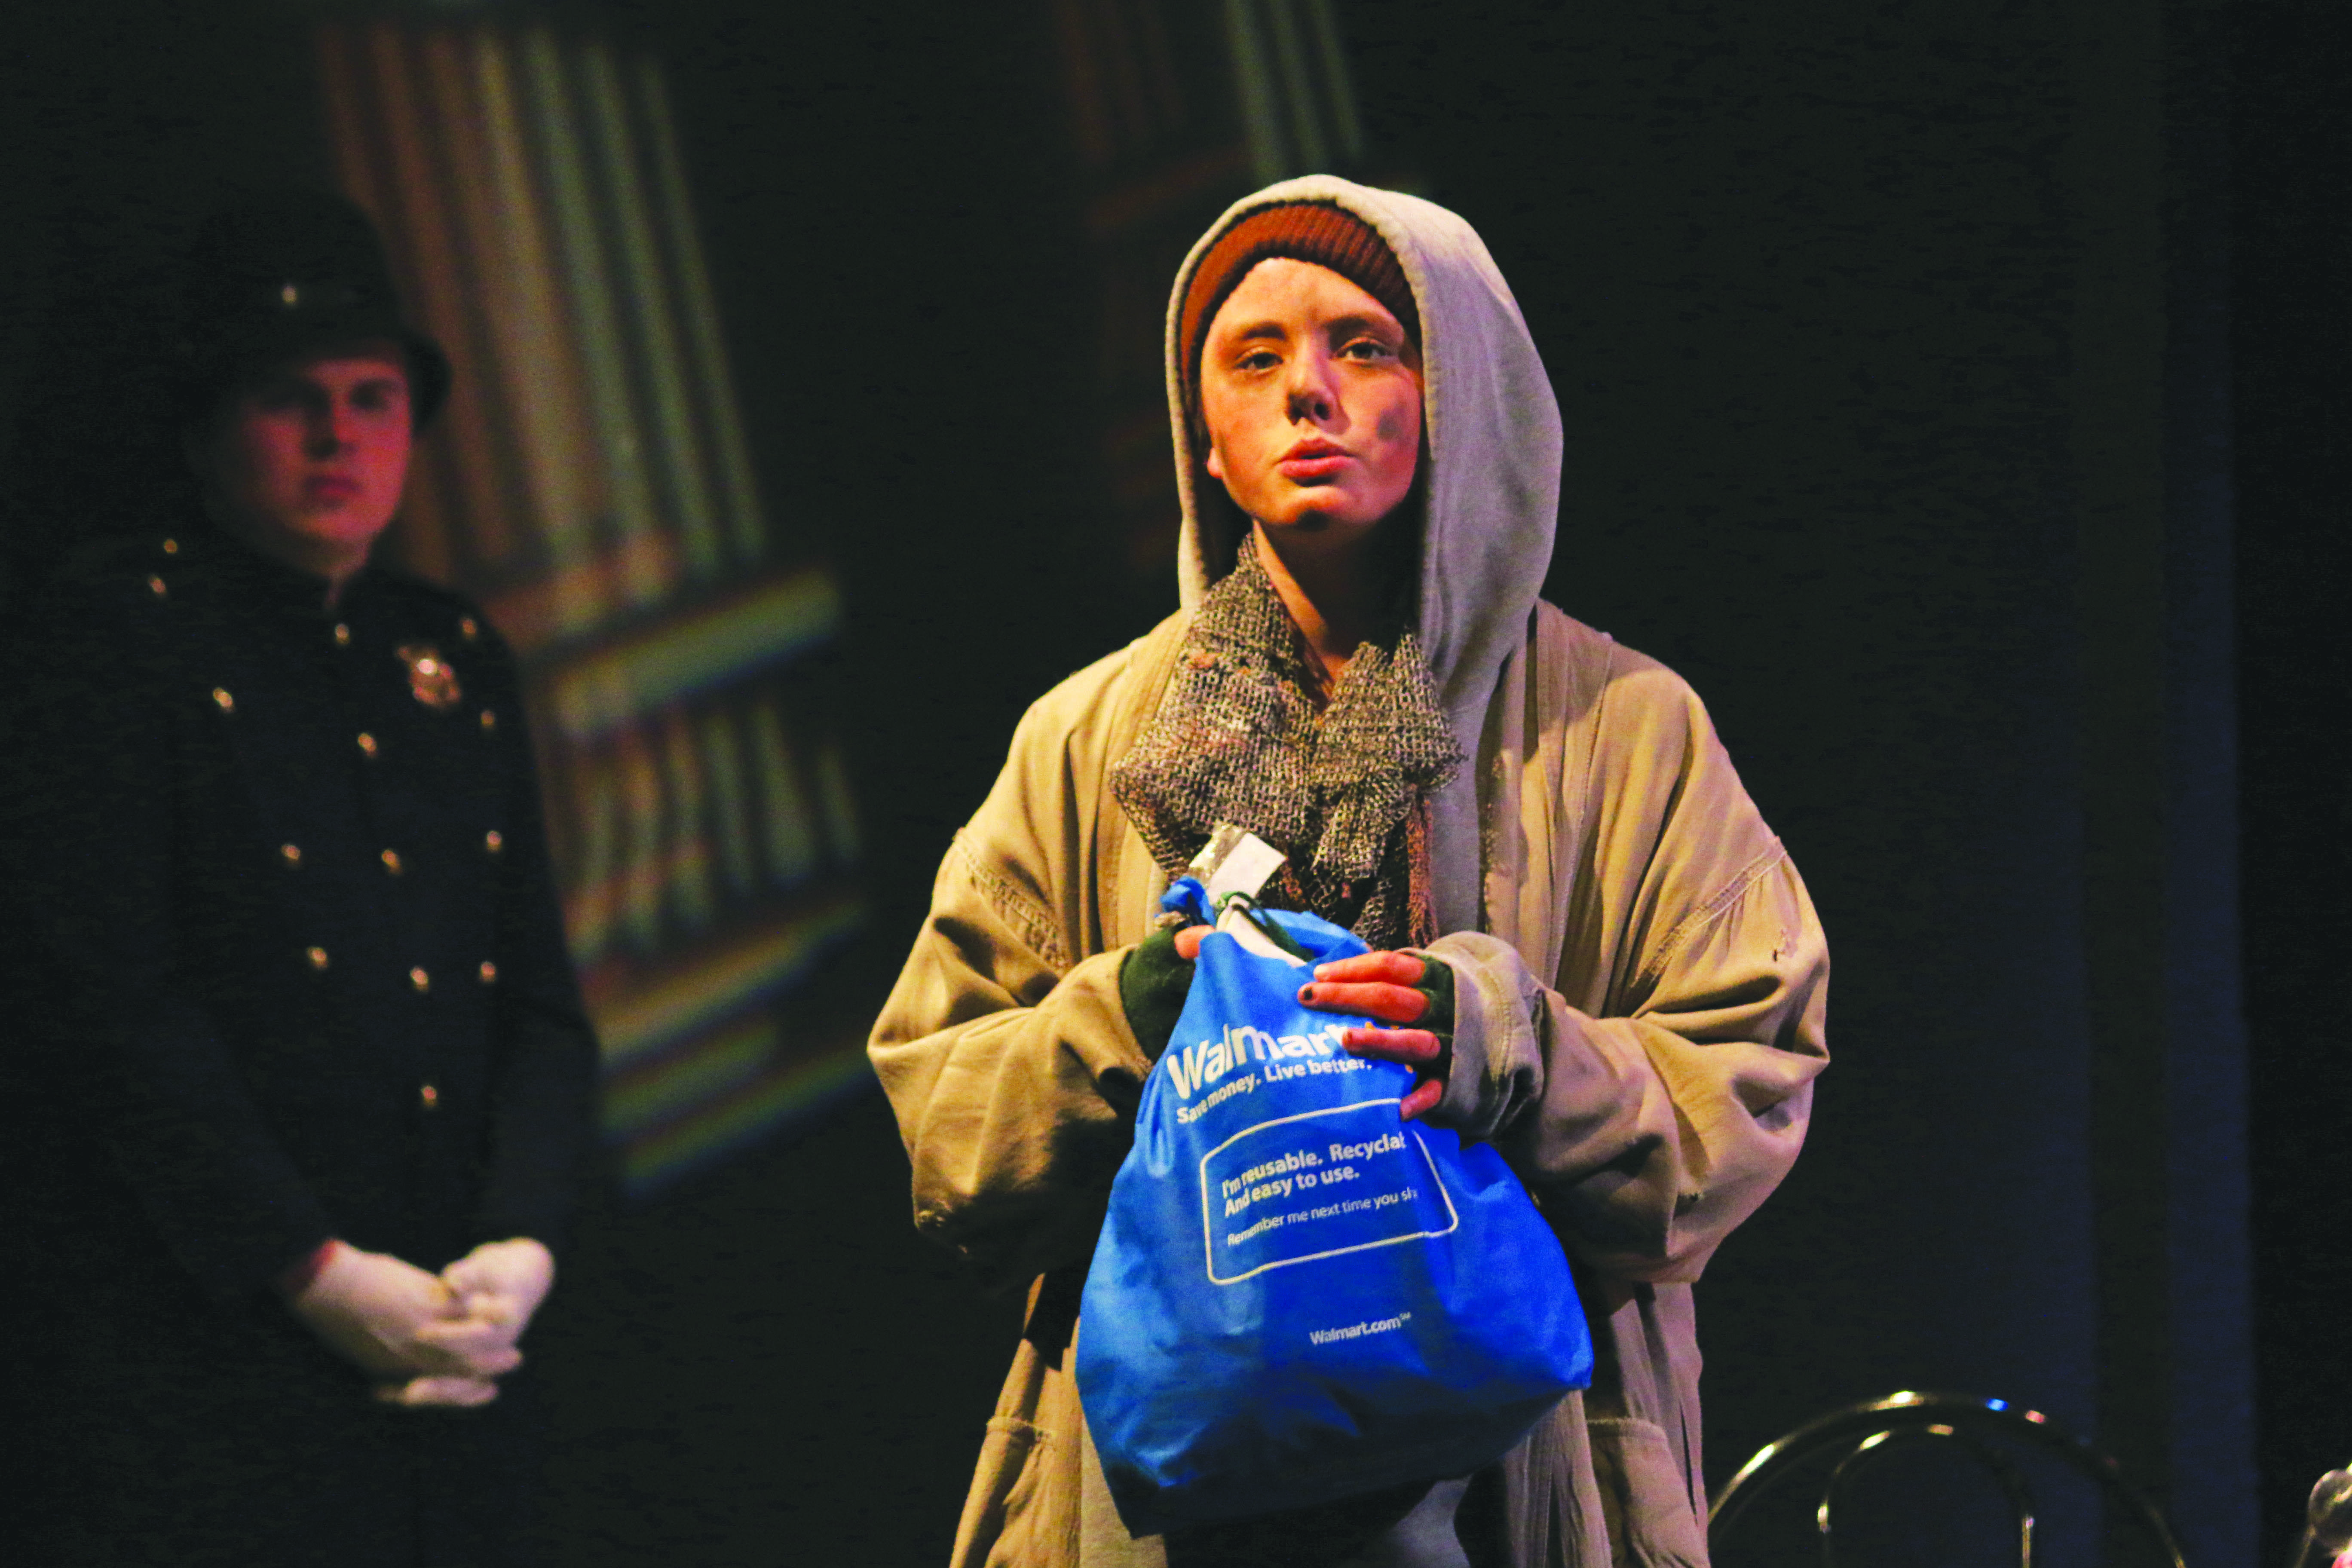 SETTING THE SCENE: Lily Beckinsale-Sheen ’17, playing the role of the hobo, laments the state of the world. Credit: Pavan Tauh/Chronicle.